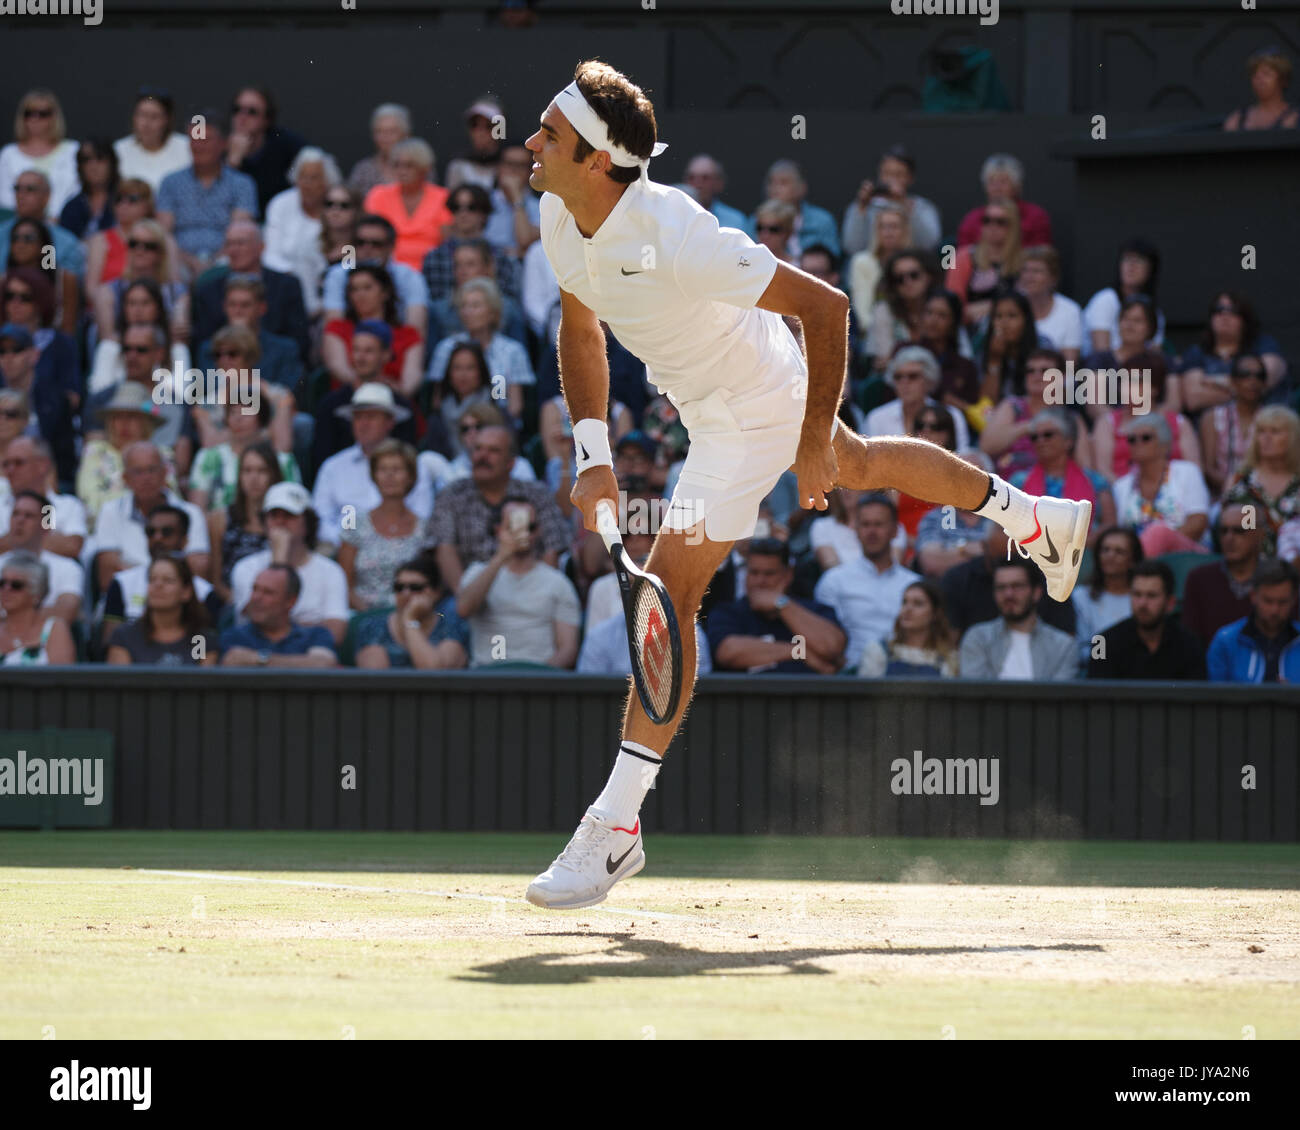 Roger Federer Sui Und Dustin Brown Editorial Stock Photo - Stock Image